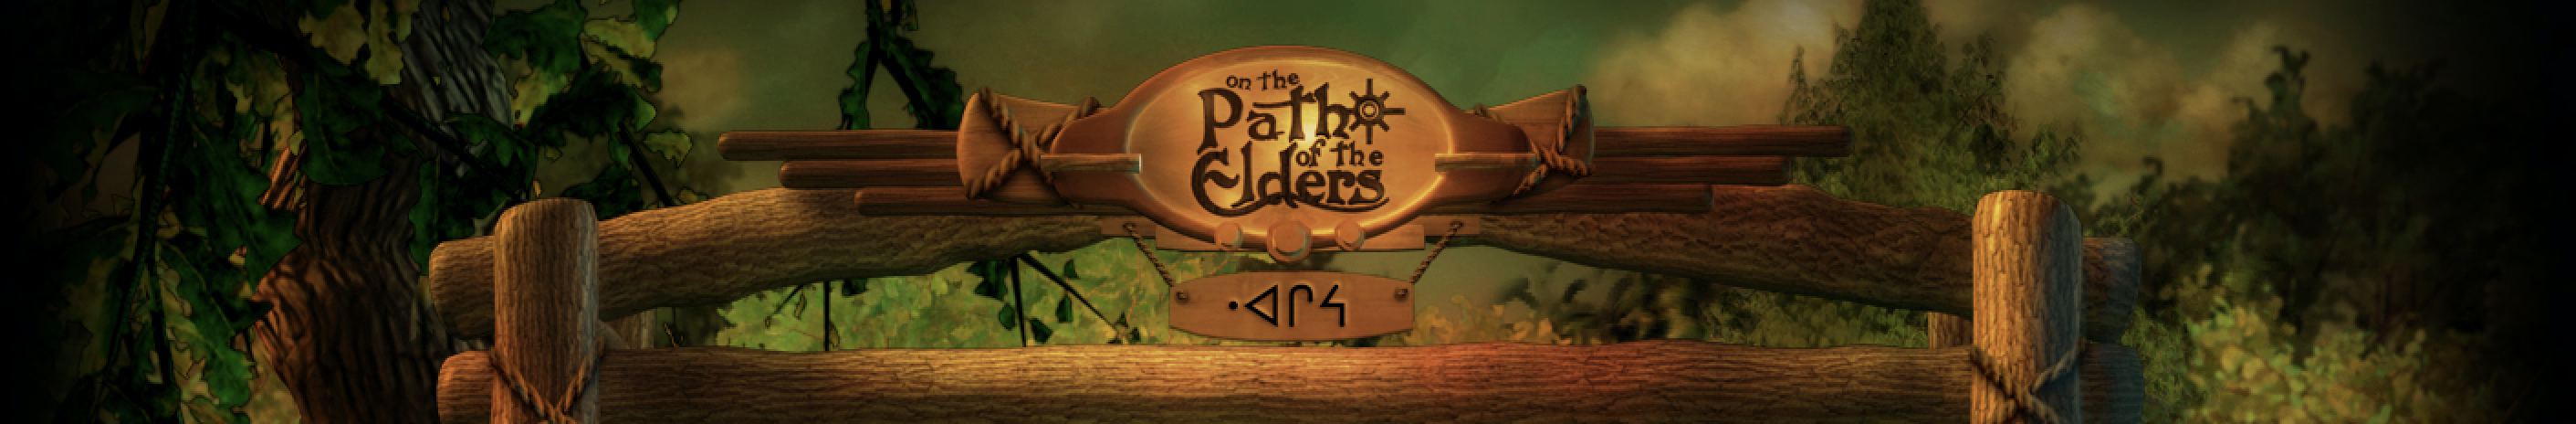 Path of the elders home